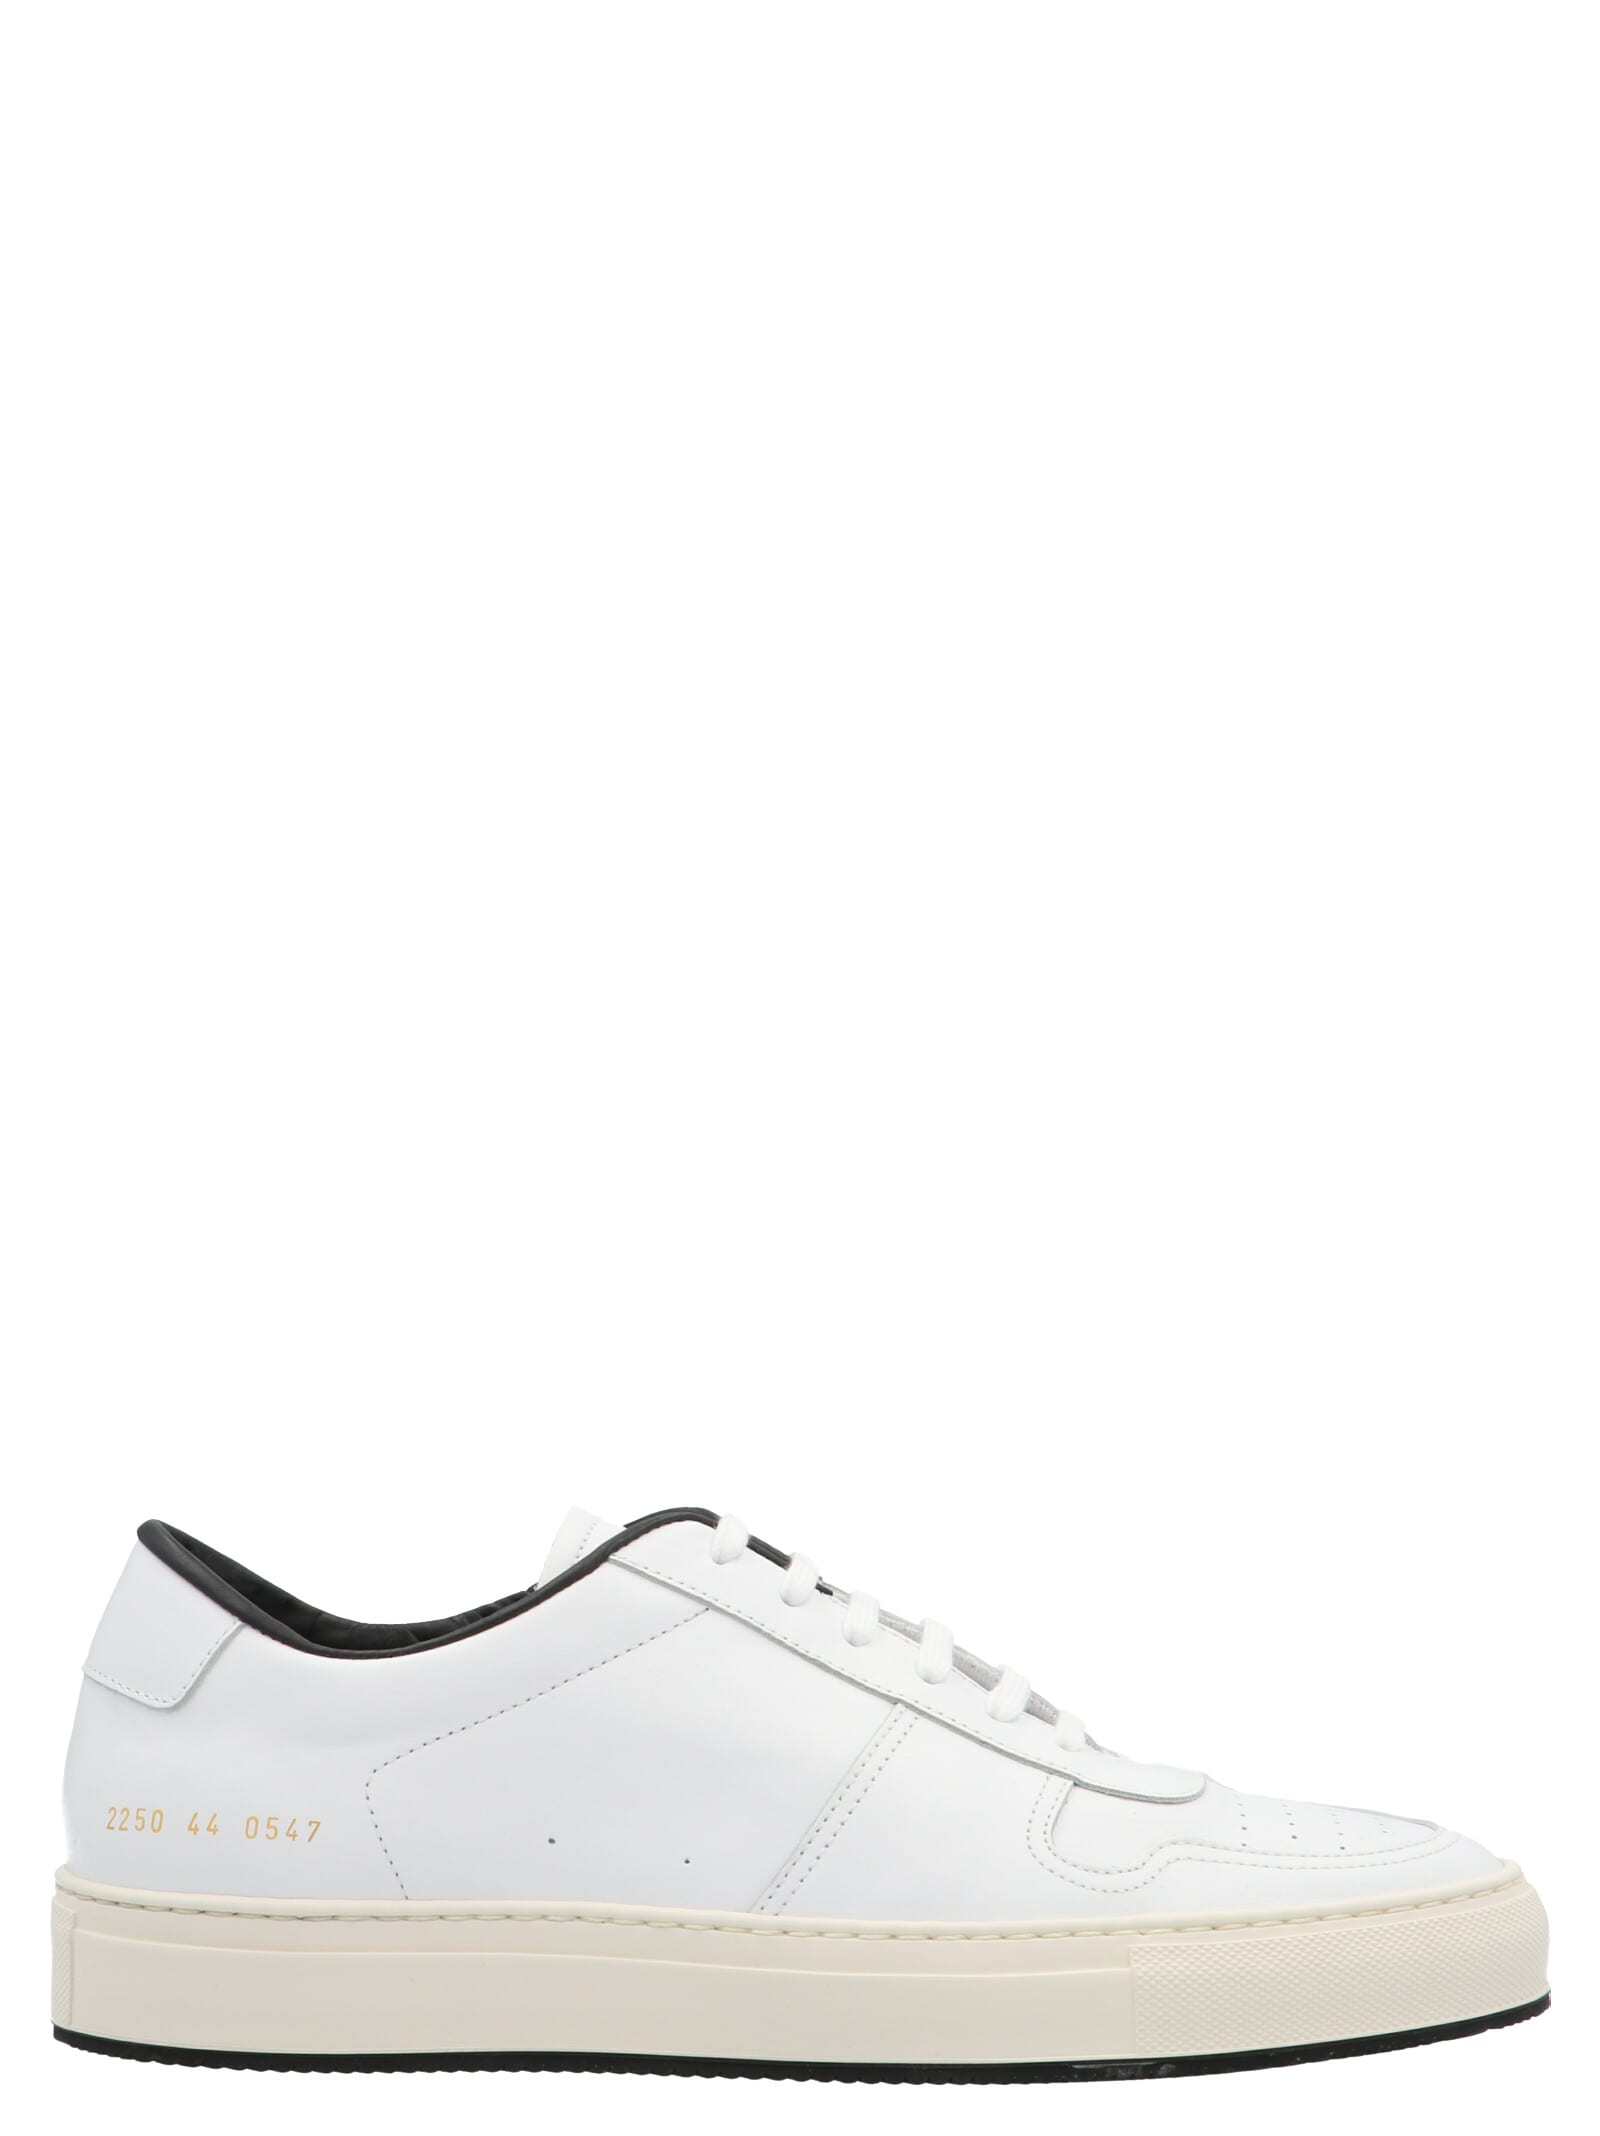 COMMON PROJECTS B BALL 88 SHOES,11243049